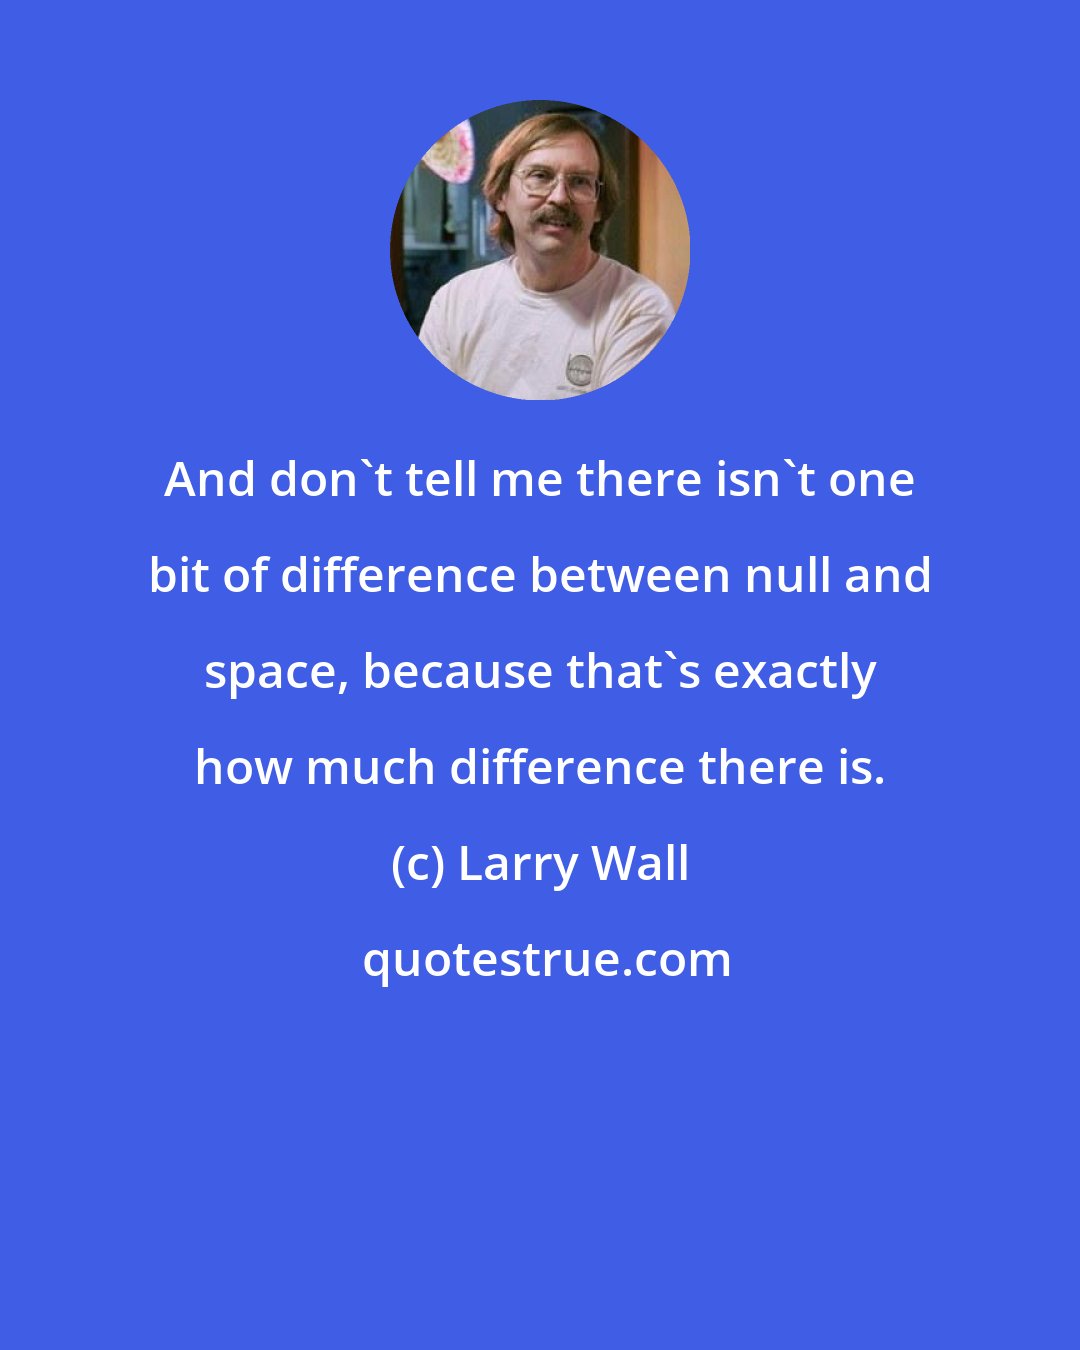 Larry Wall: And don't tell me there isn't one bit of difference between null and space, because that's exactly how much difference there is.